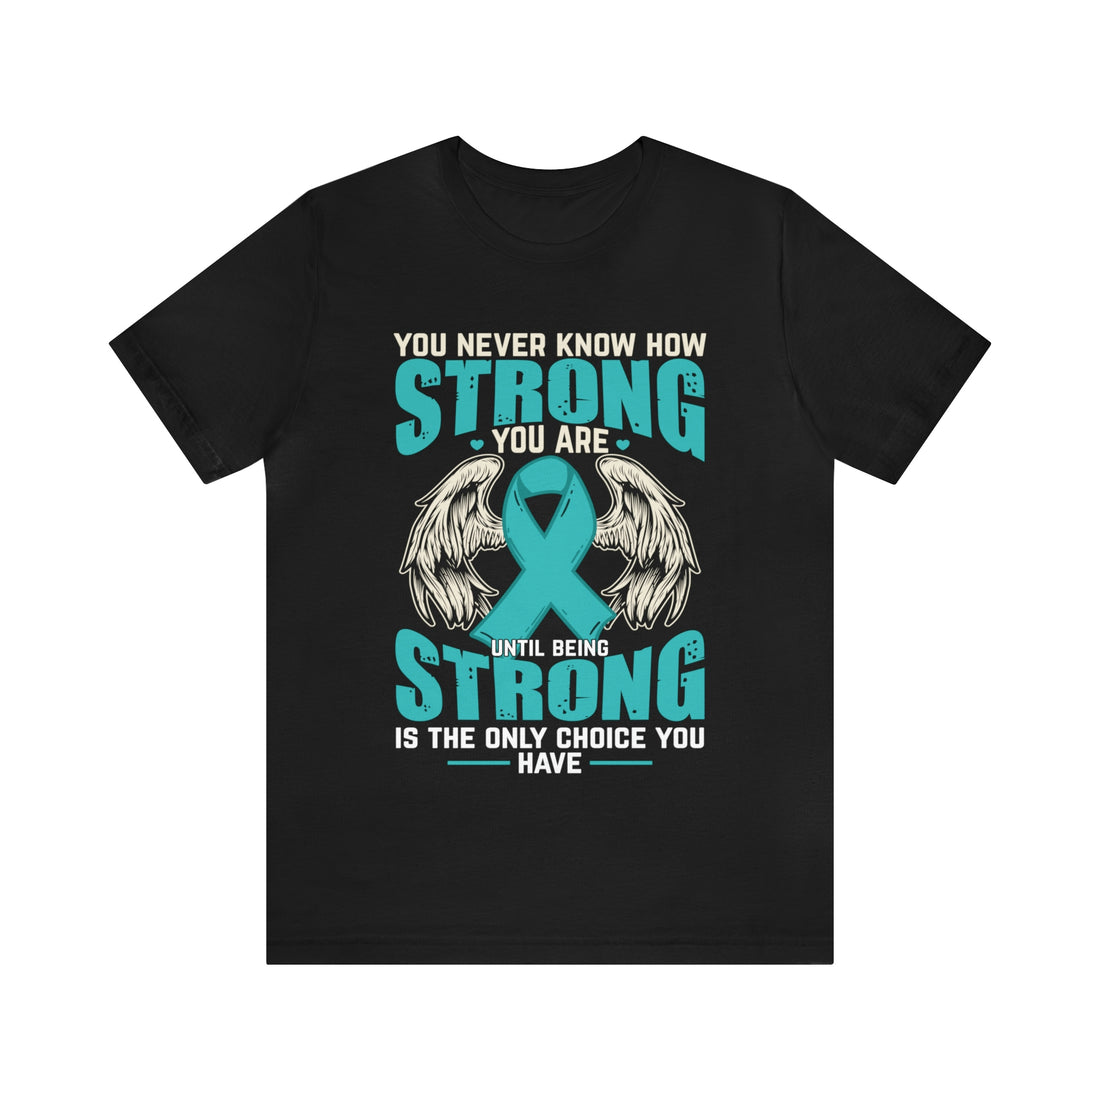 You Never Know How Strong You Are - Unisex Jersey Short Sleeve Tee